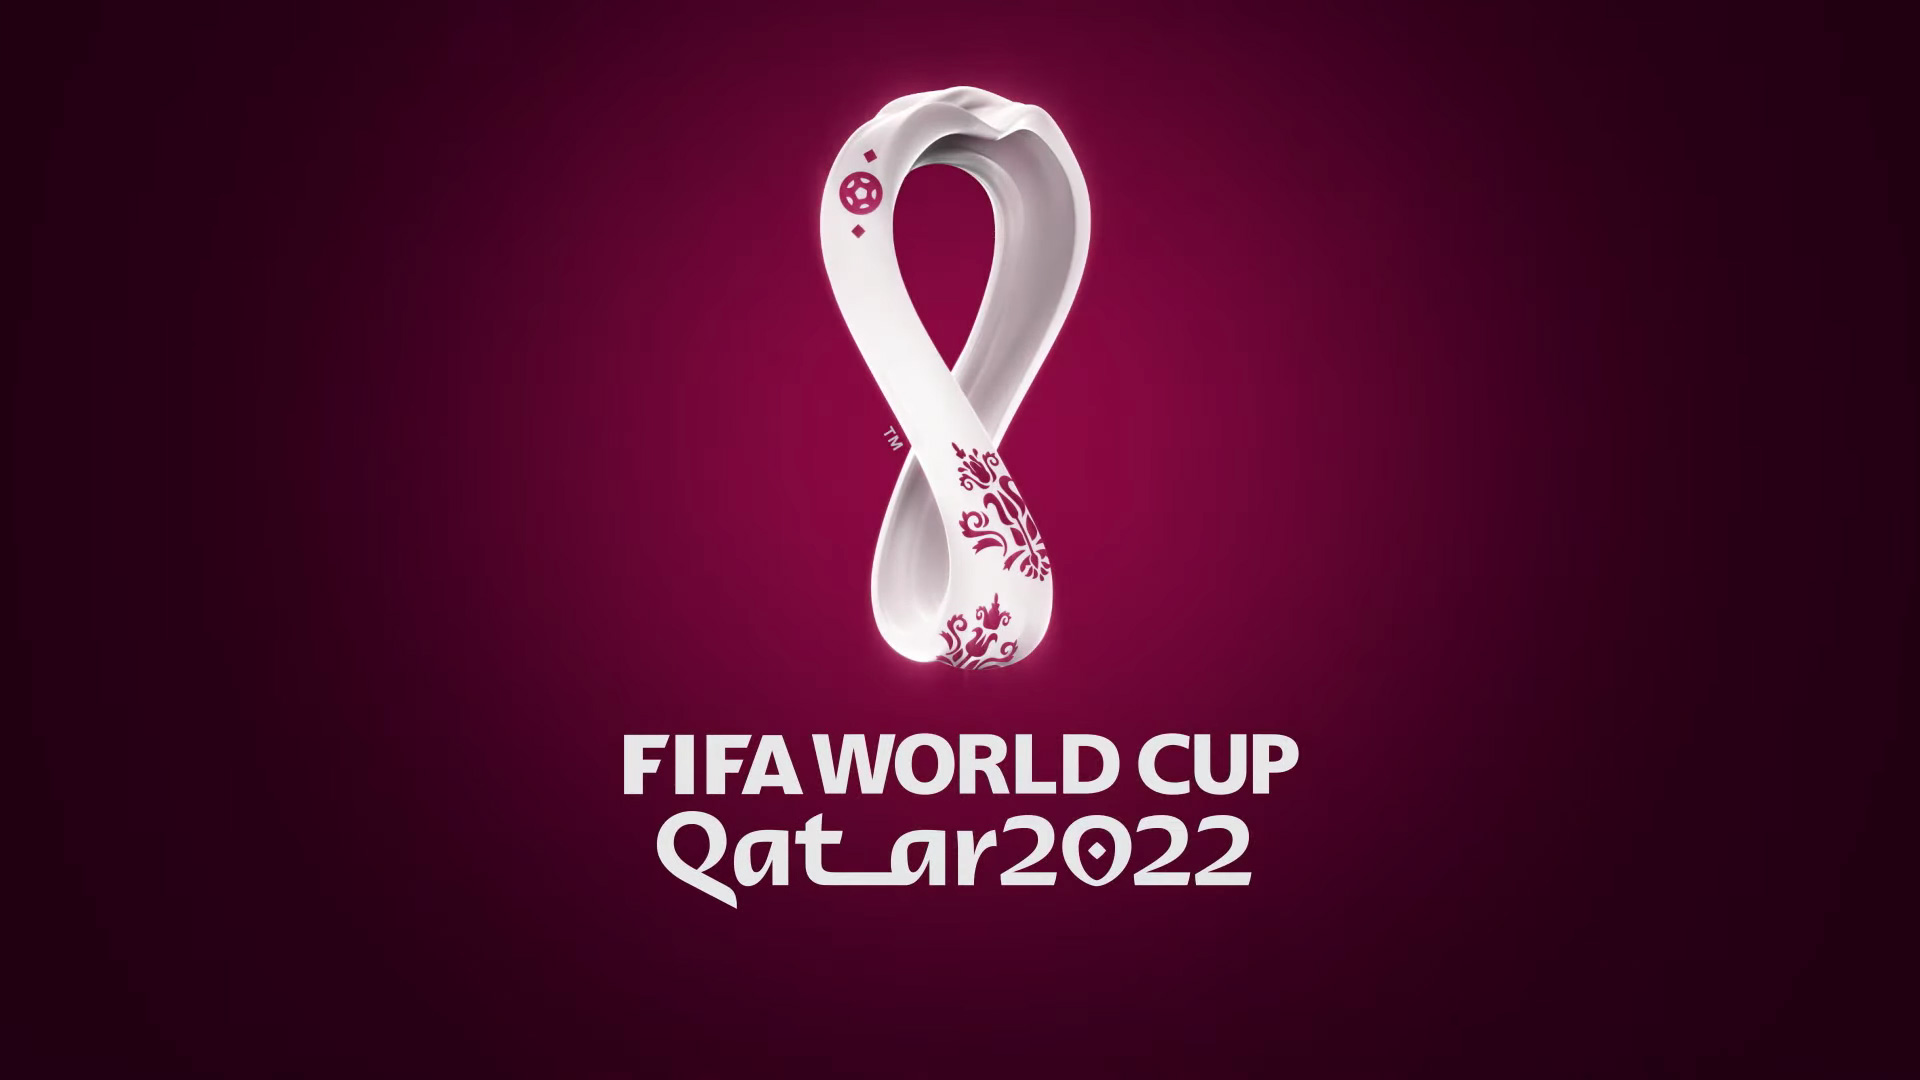 FIFA World Cup 2022: Organisers announces sale of WHOPPING 1.2M tickets as fans set to flock Doha for mega event - Check out